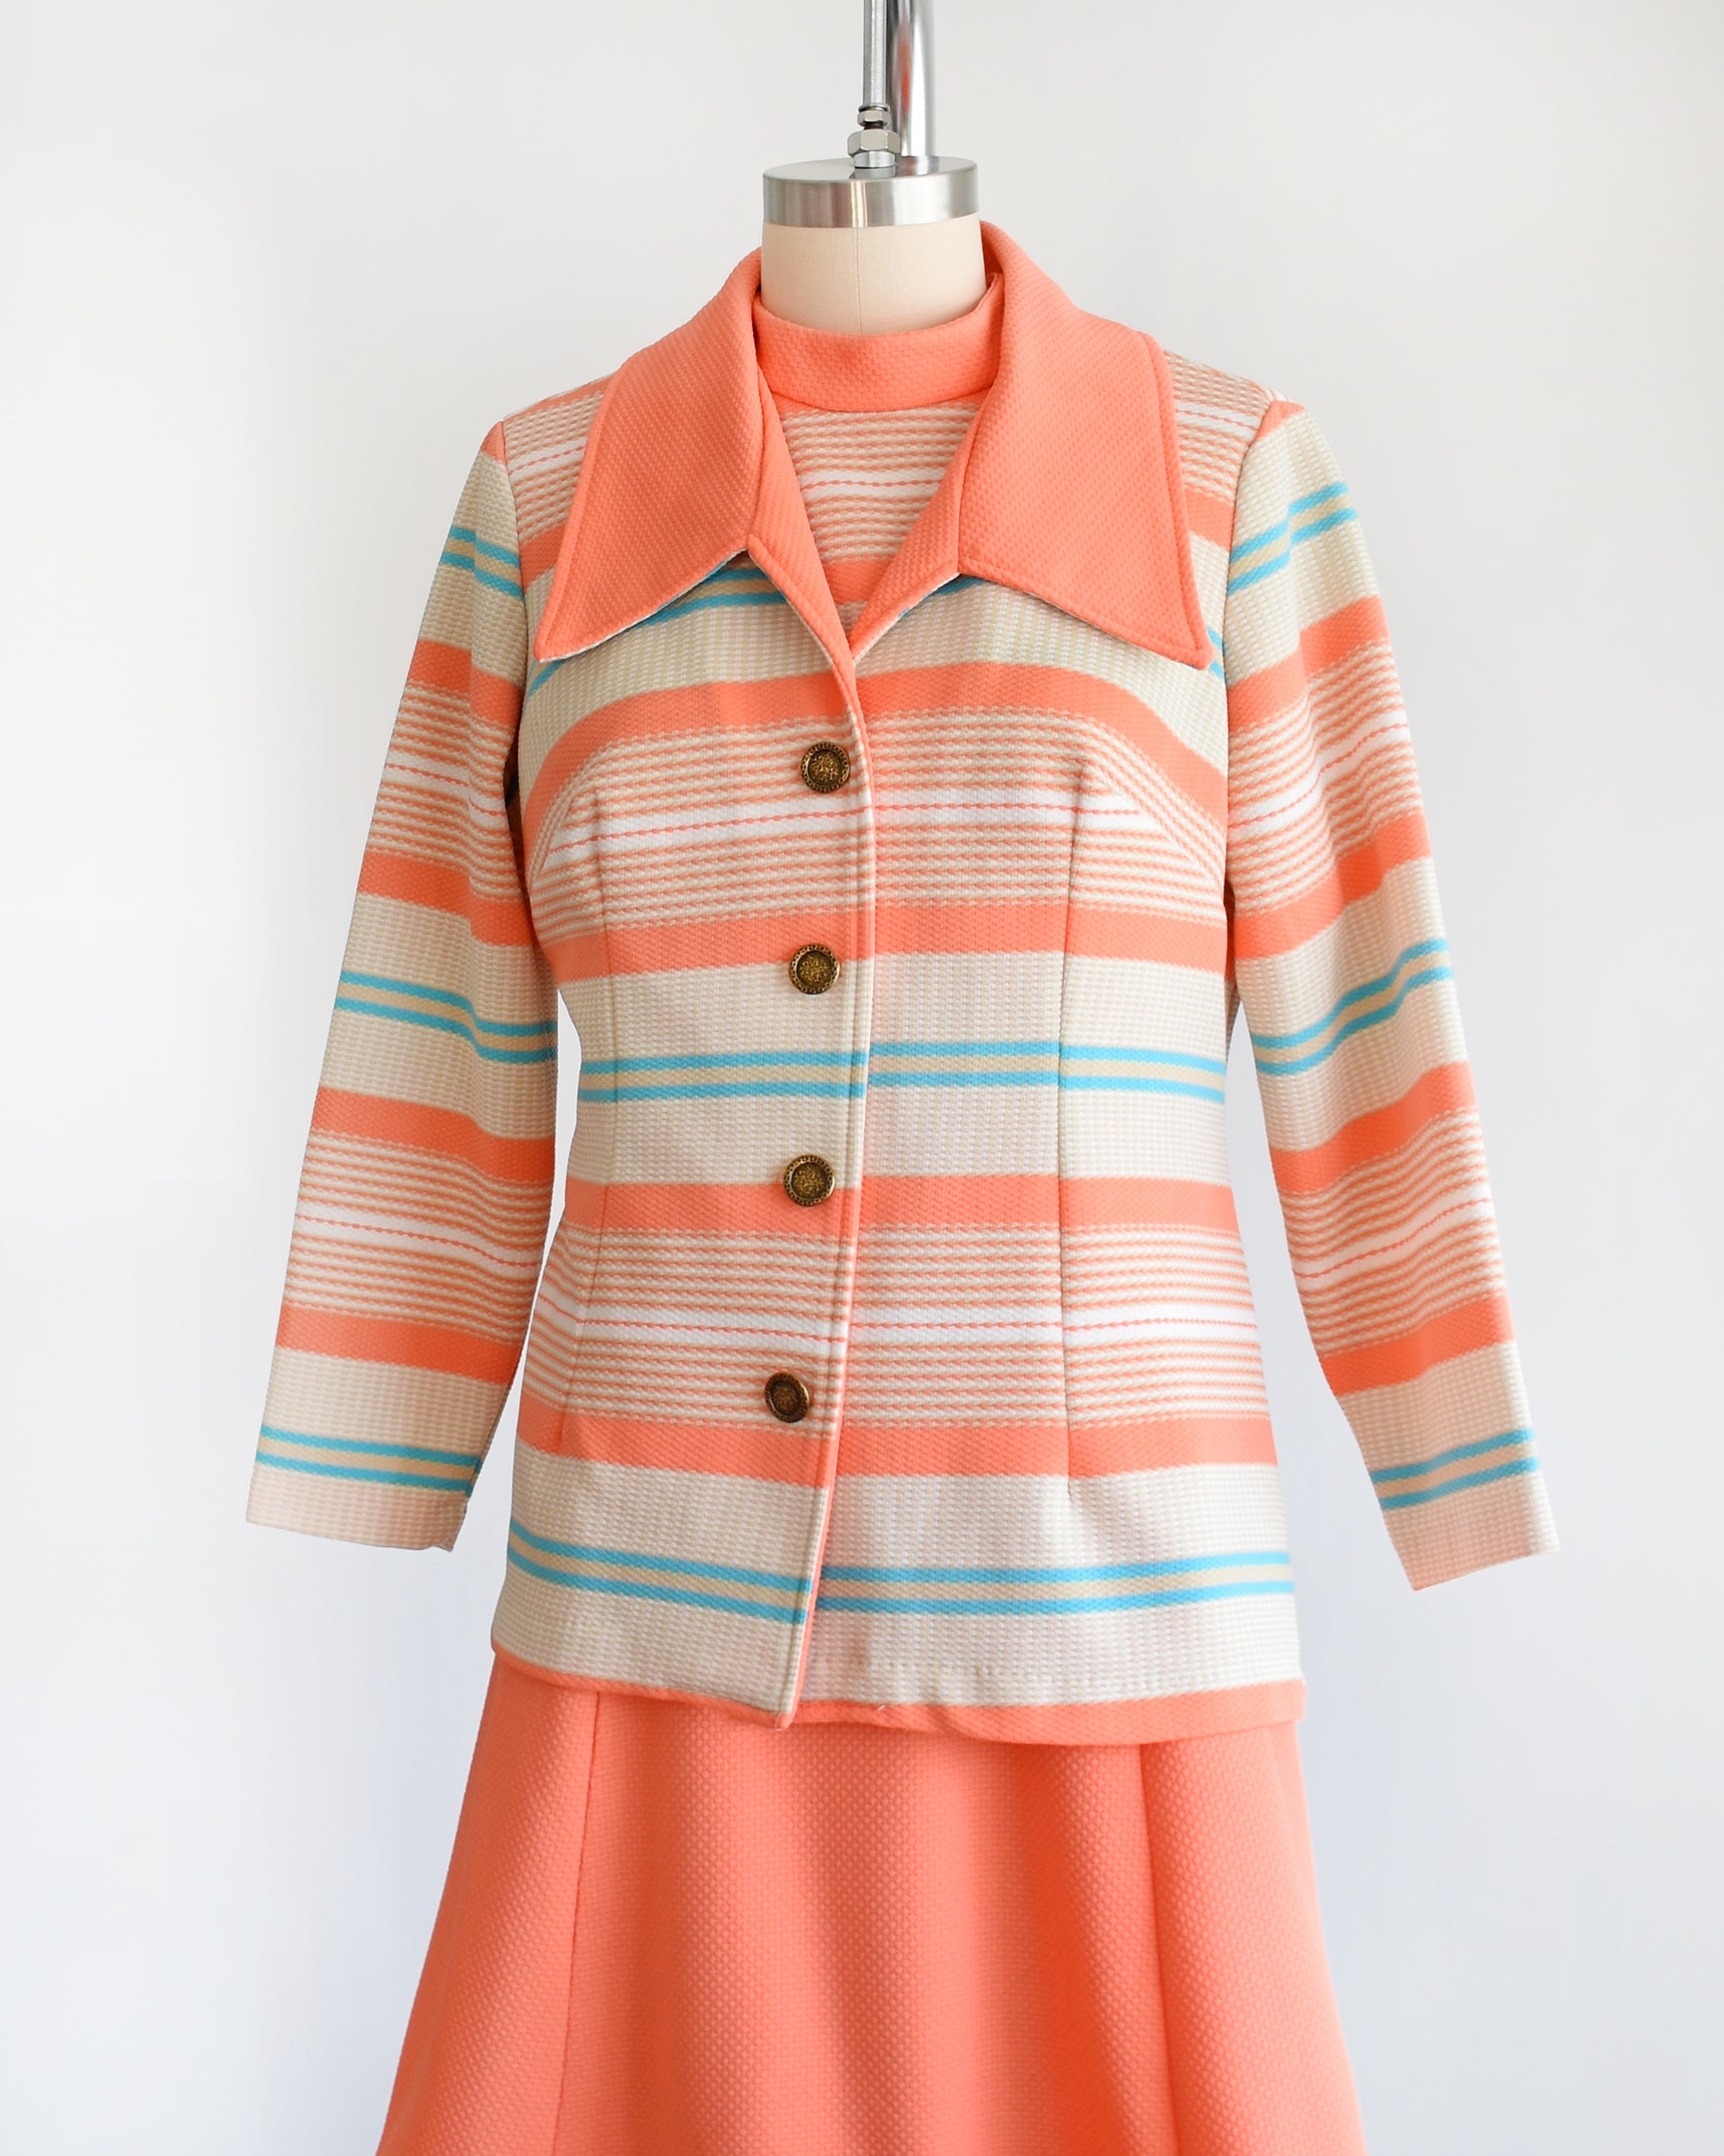 Side view of a vintage 1970s peach and blue mod dress set